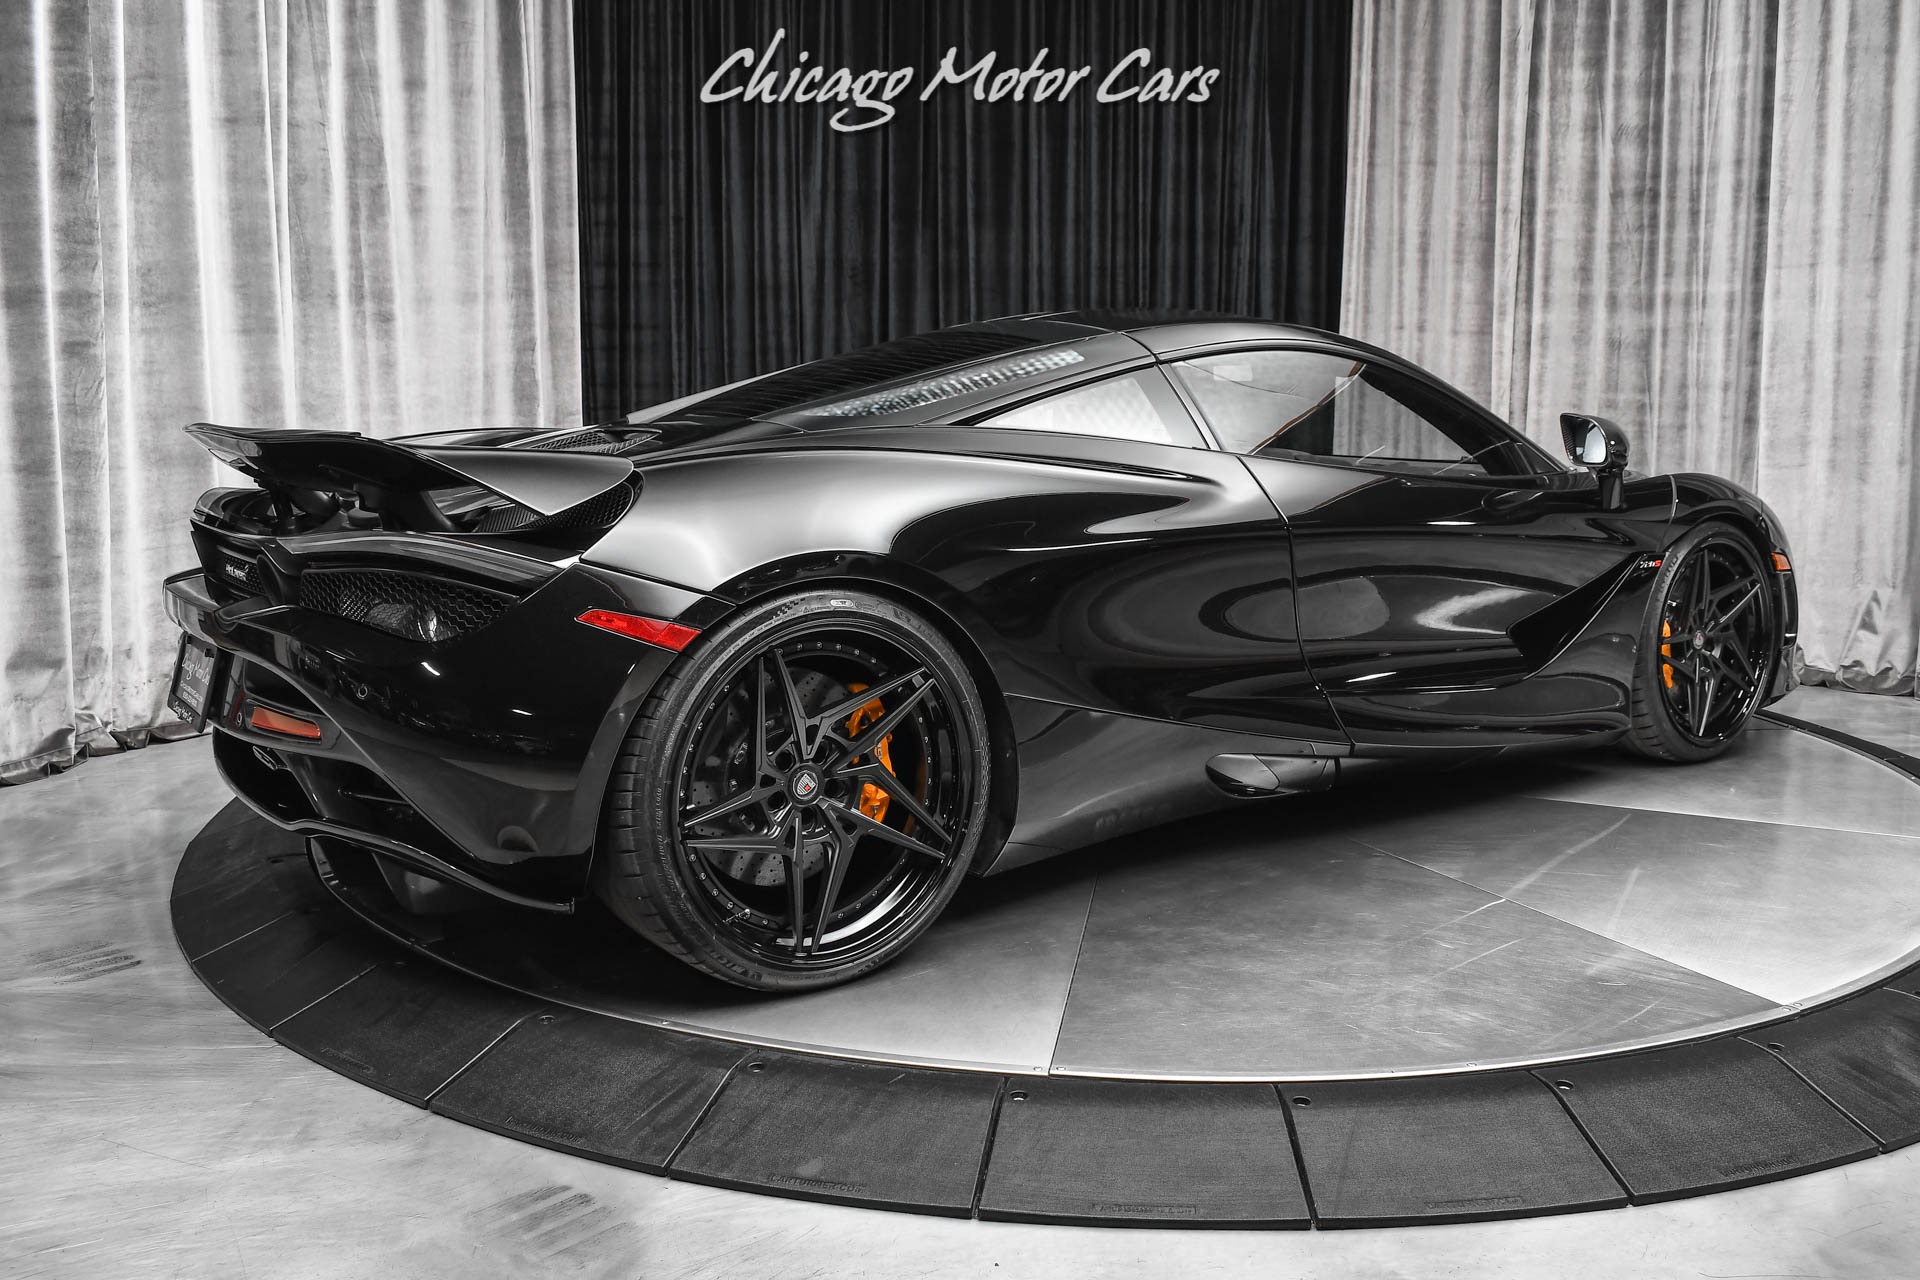 Used-2020-McLaren-720S-Performance-Coupe-Only-2k-Miles-Anrky-Wheels-Carbon-Fiber-LOADED